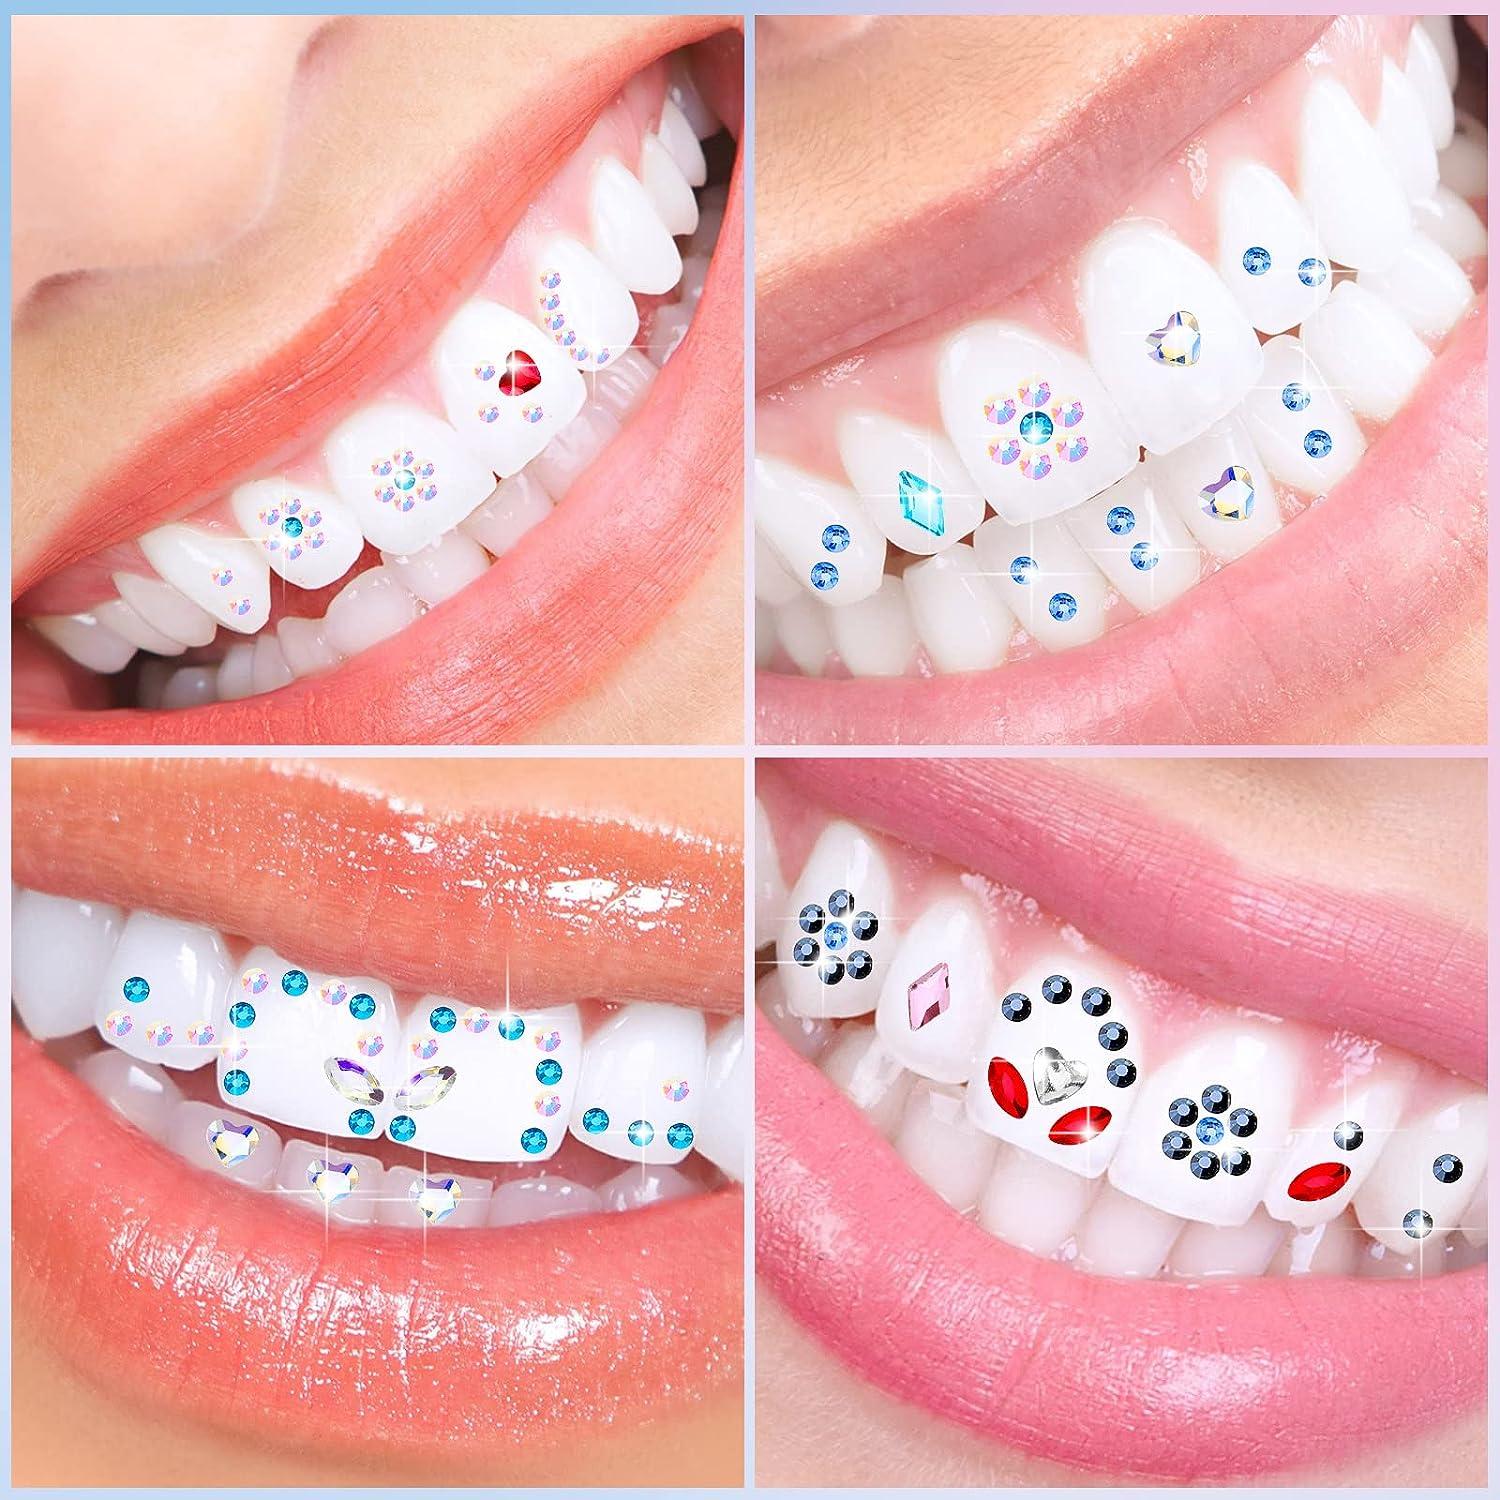 DIY Tooth Gem Set Reliable White Tooth Crystal Jewelry Tooth Decoration Kit